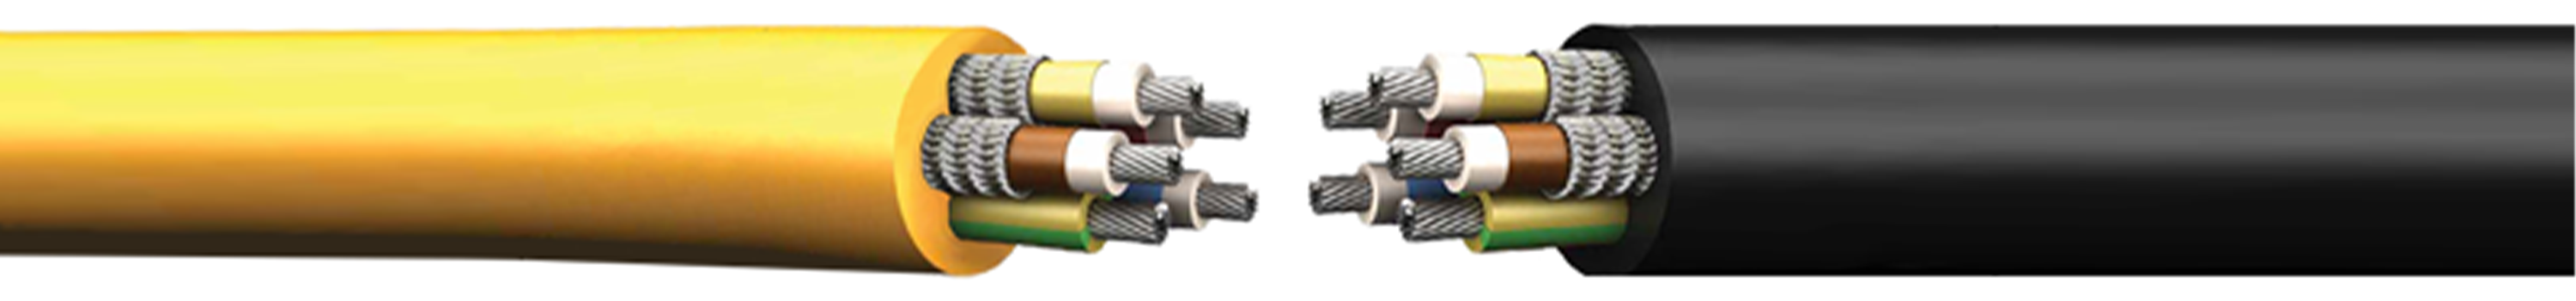 TYPE-44-BS-6708-MINING-CABLES